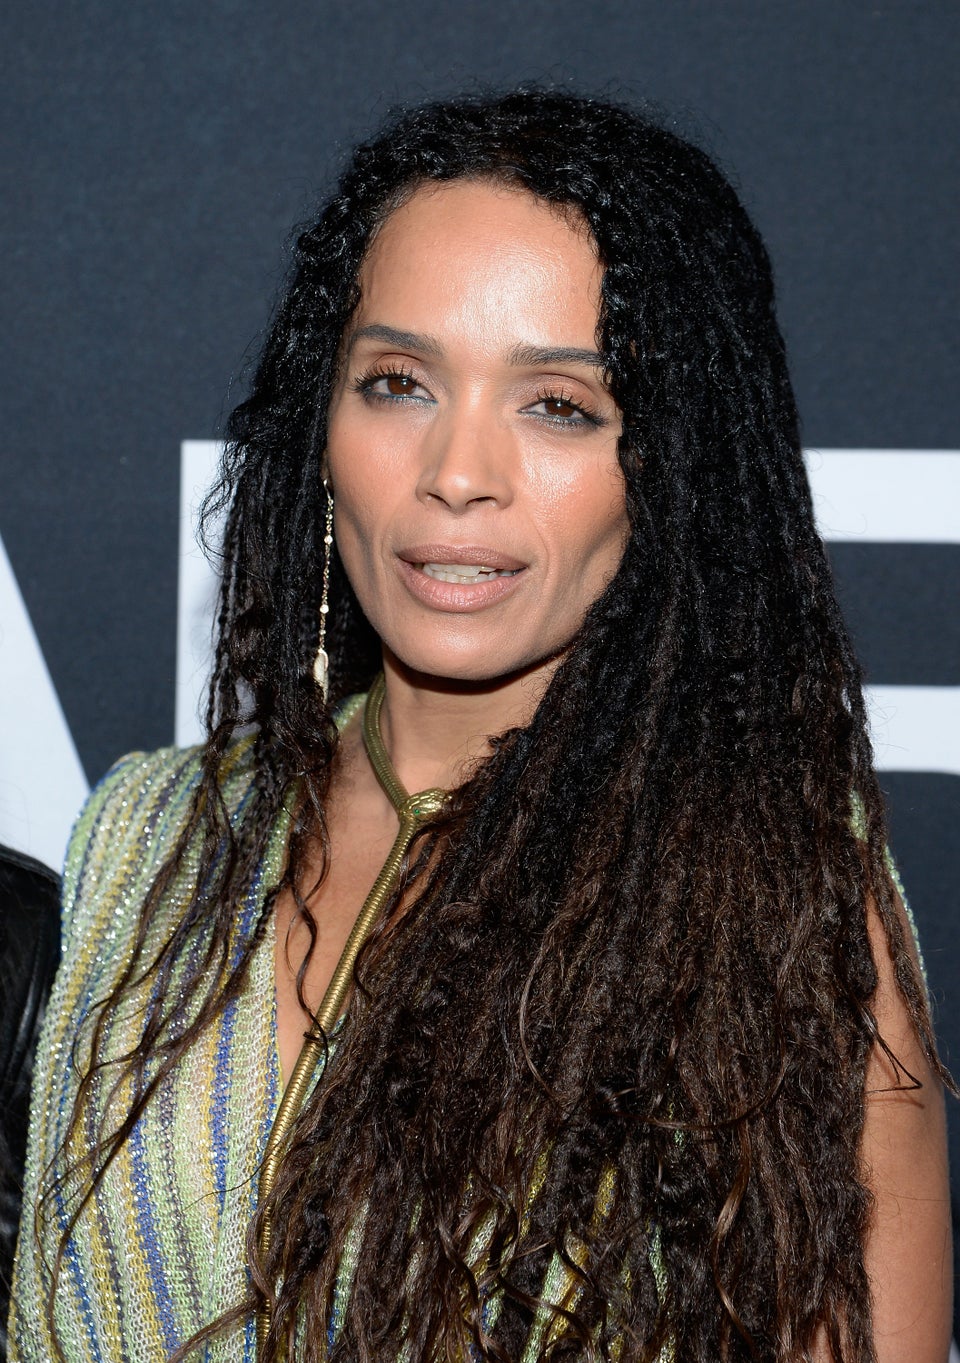 Lisa Bonet Was ‘Not Surprised’ By Allegations Against Bill Cosby